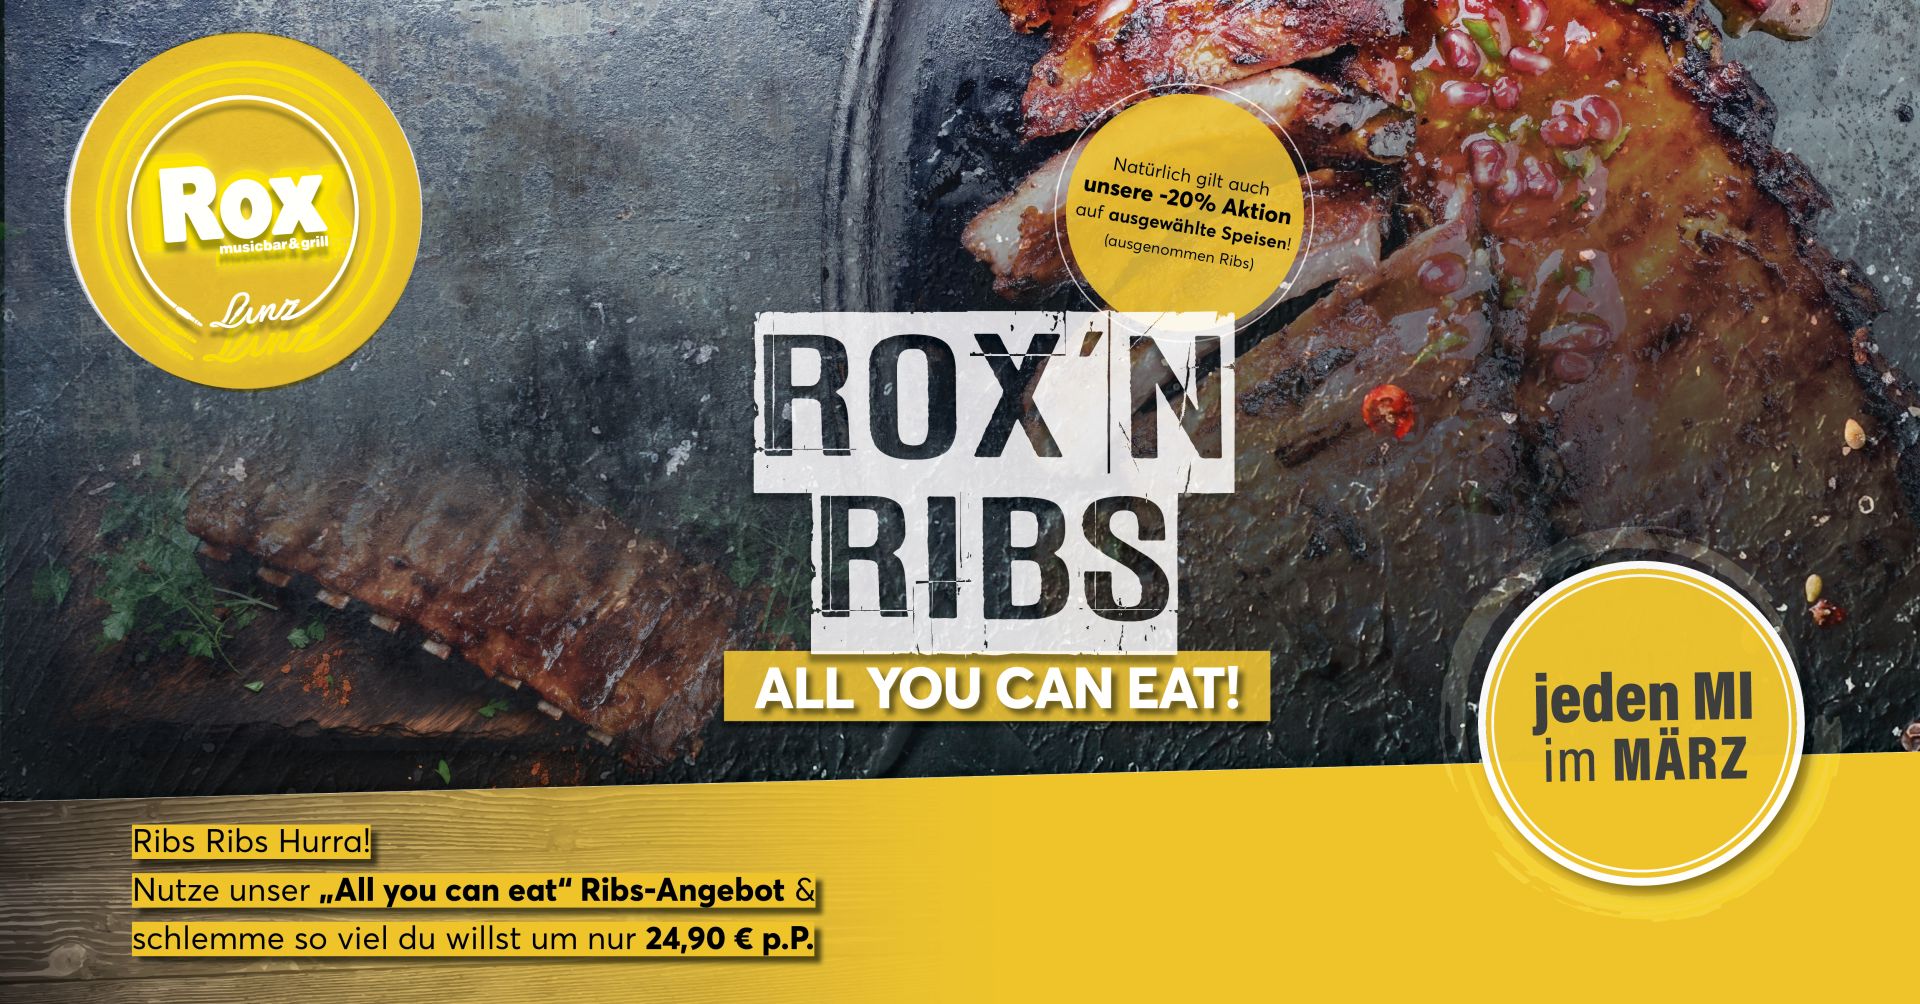 ROX'n'RIBS - all you can eat! Unser Mittwochs Special im März